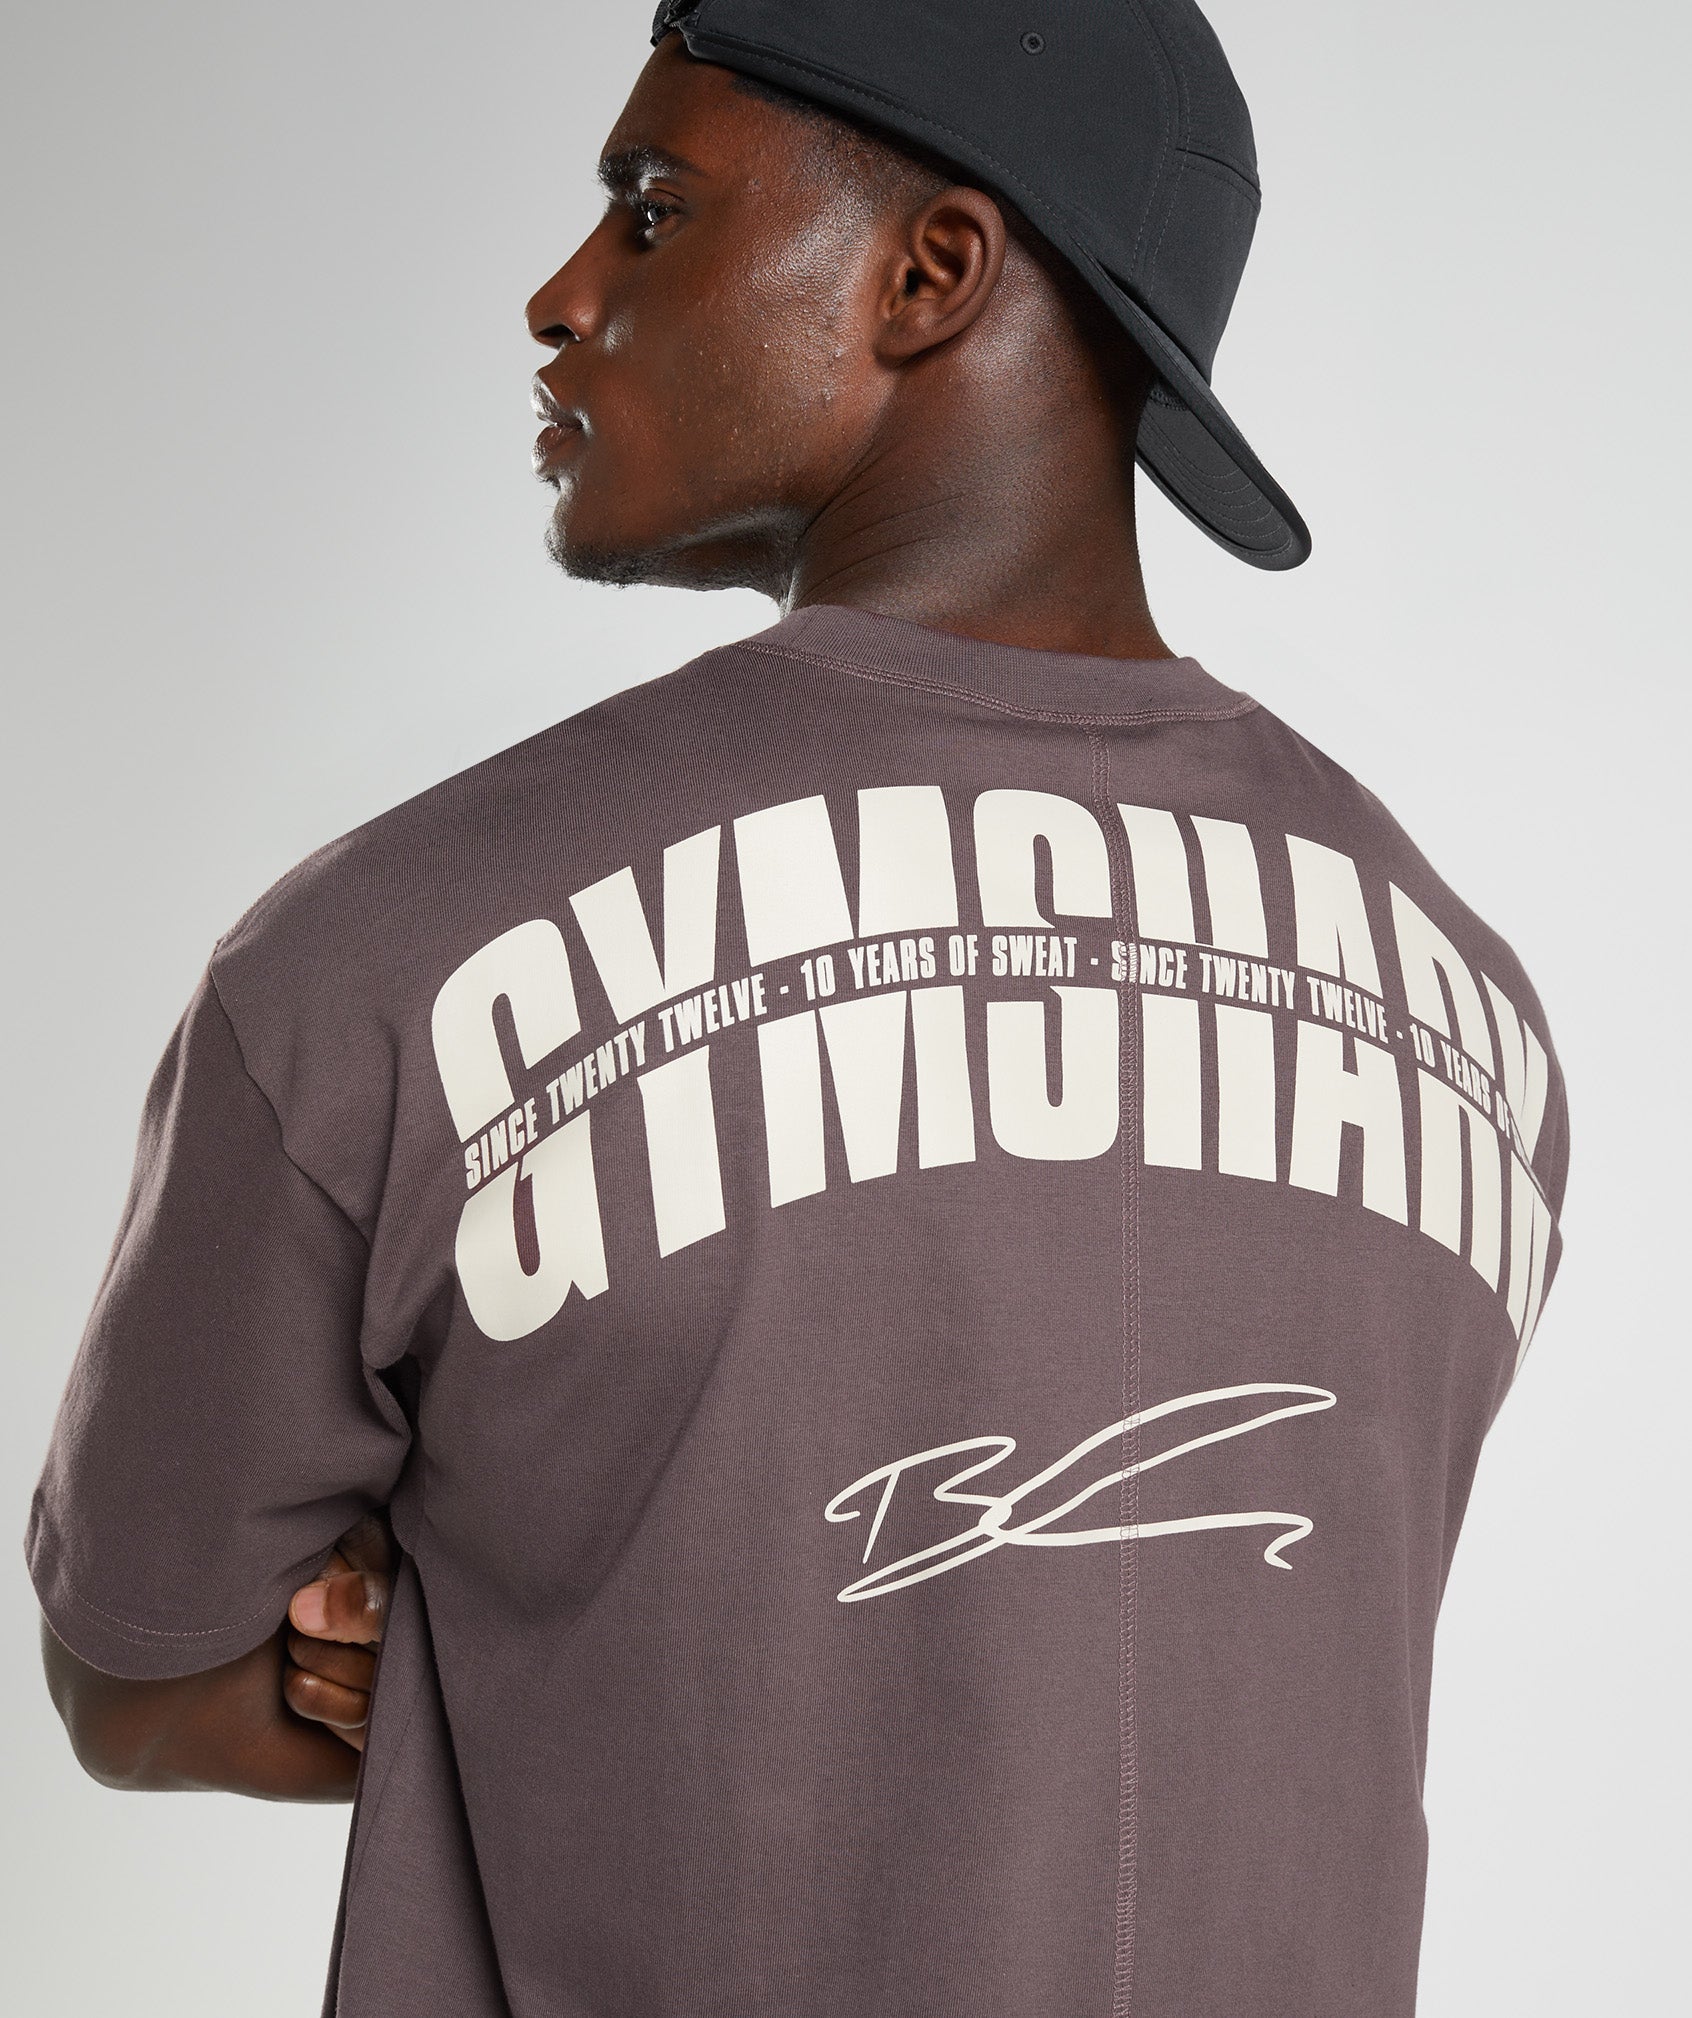 GS10 Year Oversized T-Shirt in Chocolate Brown - view 6